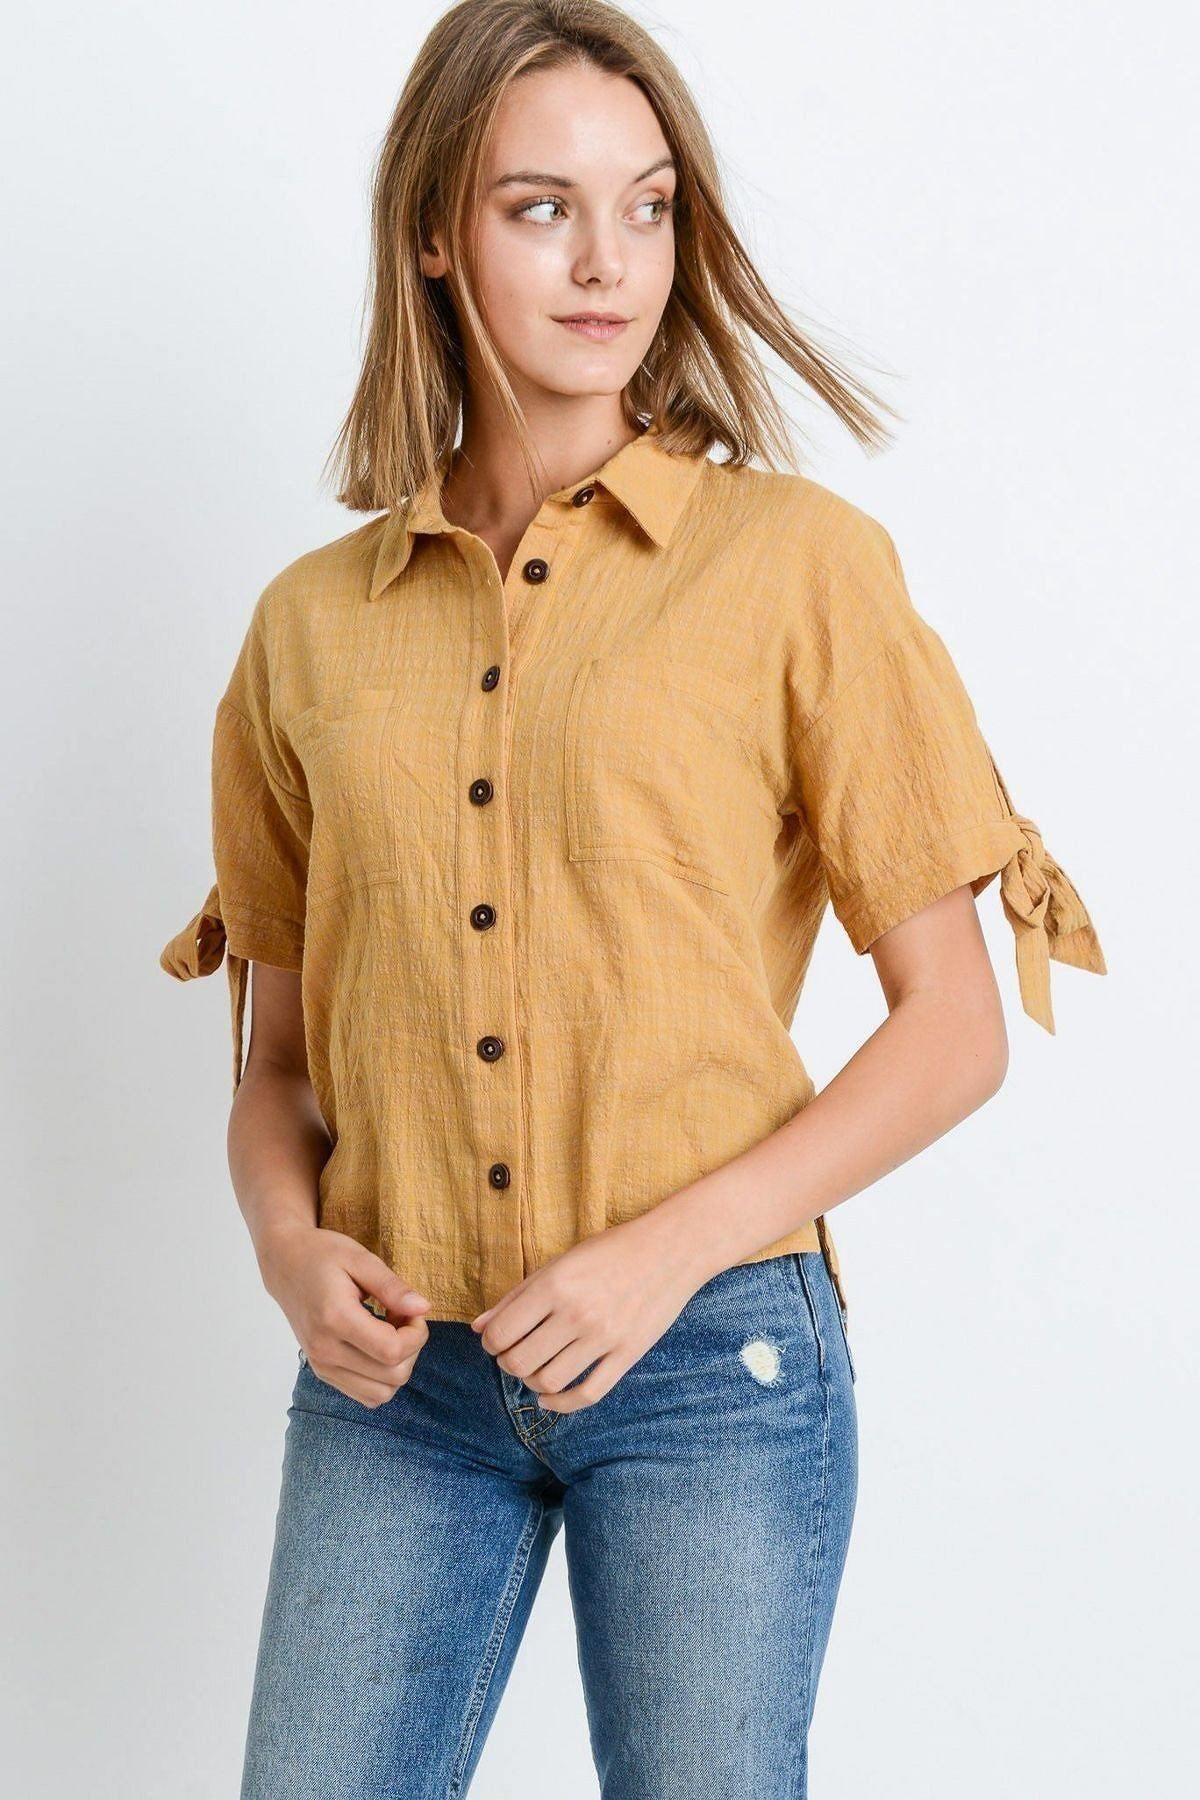 Short Sleeve Button Up Top With Tie Sleeve - Pearlara